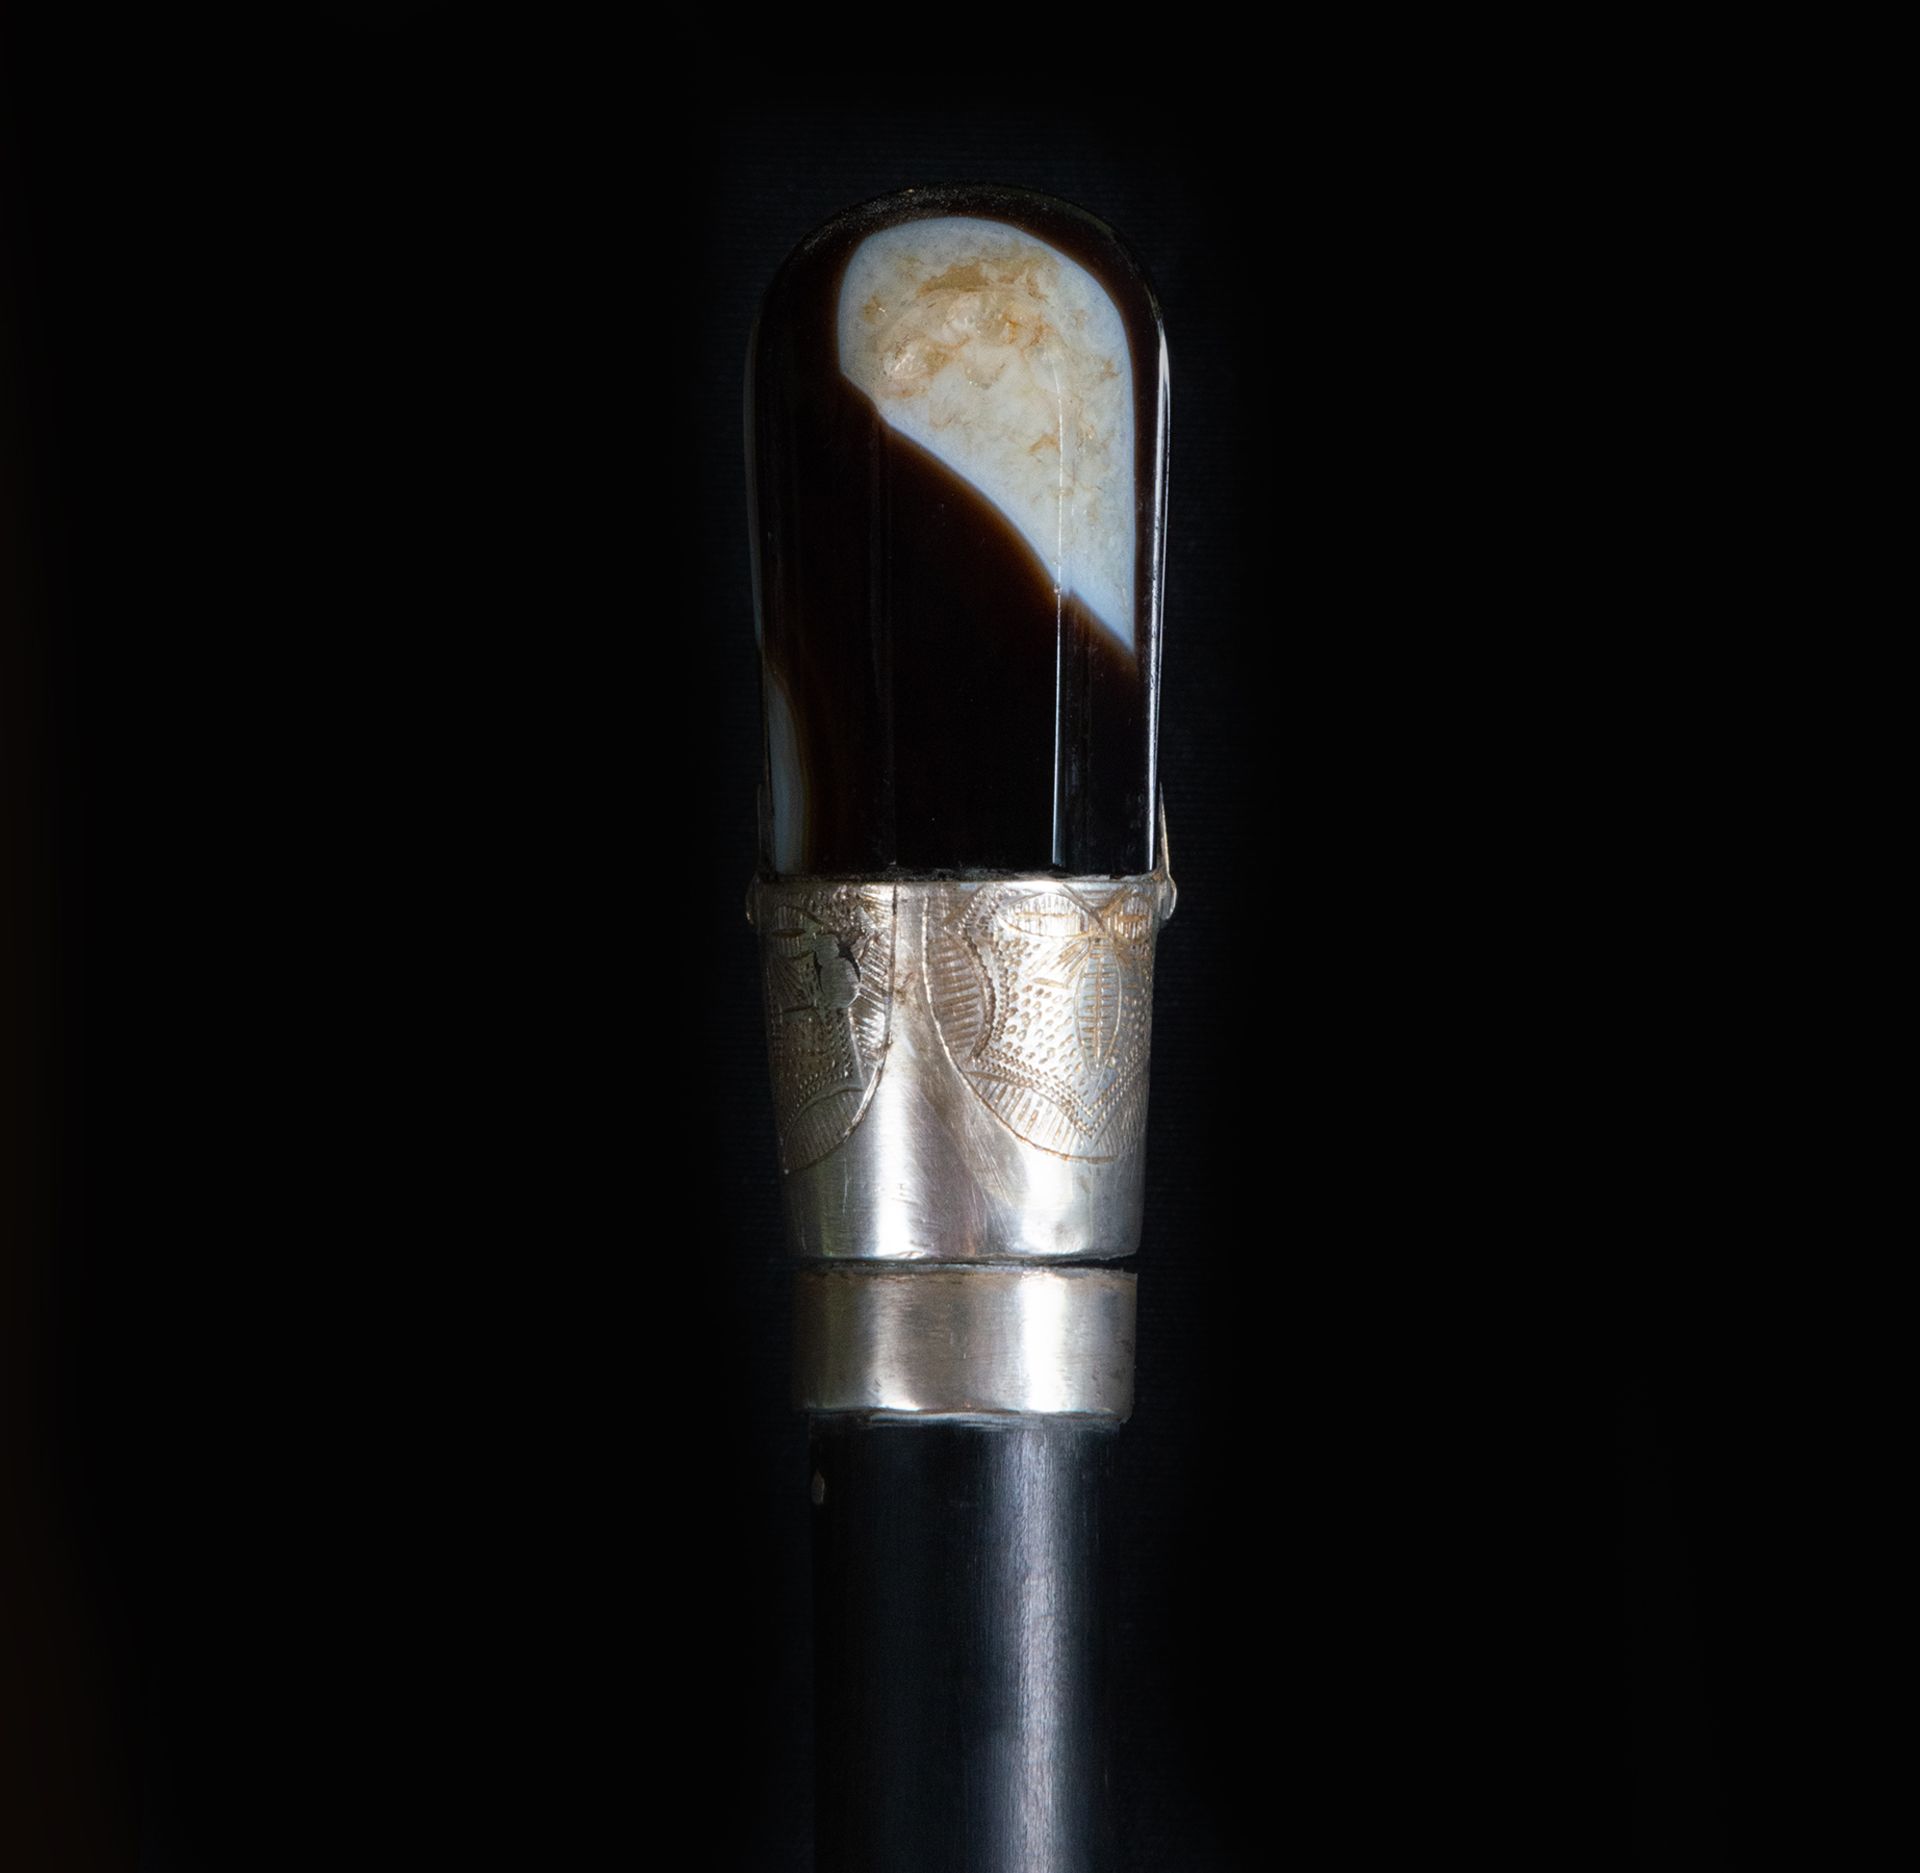 Rare walking stick with agate handle mounted in silver with an ebony body, 19th century - Image 4 of 4